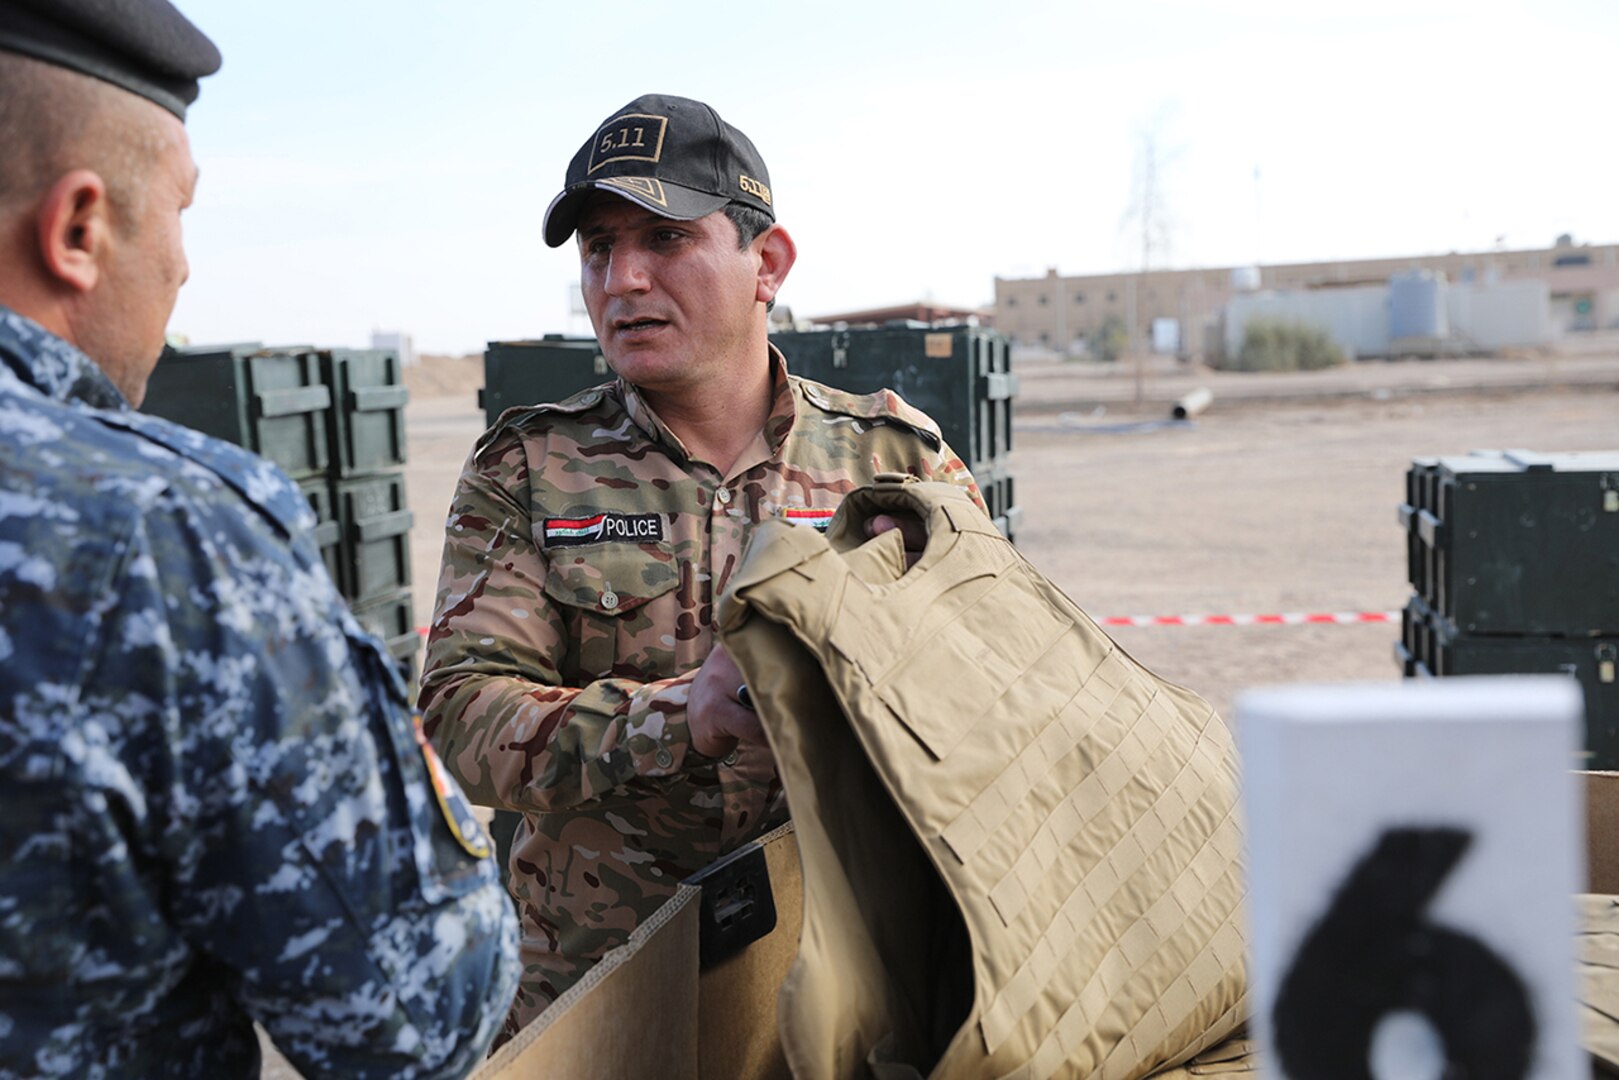 Members of the Iraqi Police look at one ballistic vest from a container during the divestment of organizational clothing and individual equipment to the Iraqi army and police at the Besmaya Range Complex, Iraq. The Coalition is enabling partnered forces to defeat ISIS by providing air, artillery and logistical support on the battlefield.